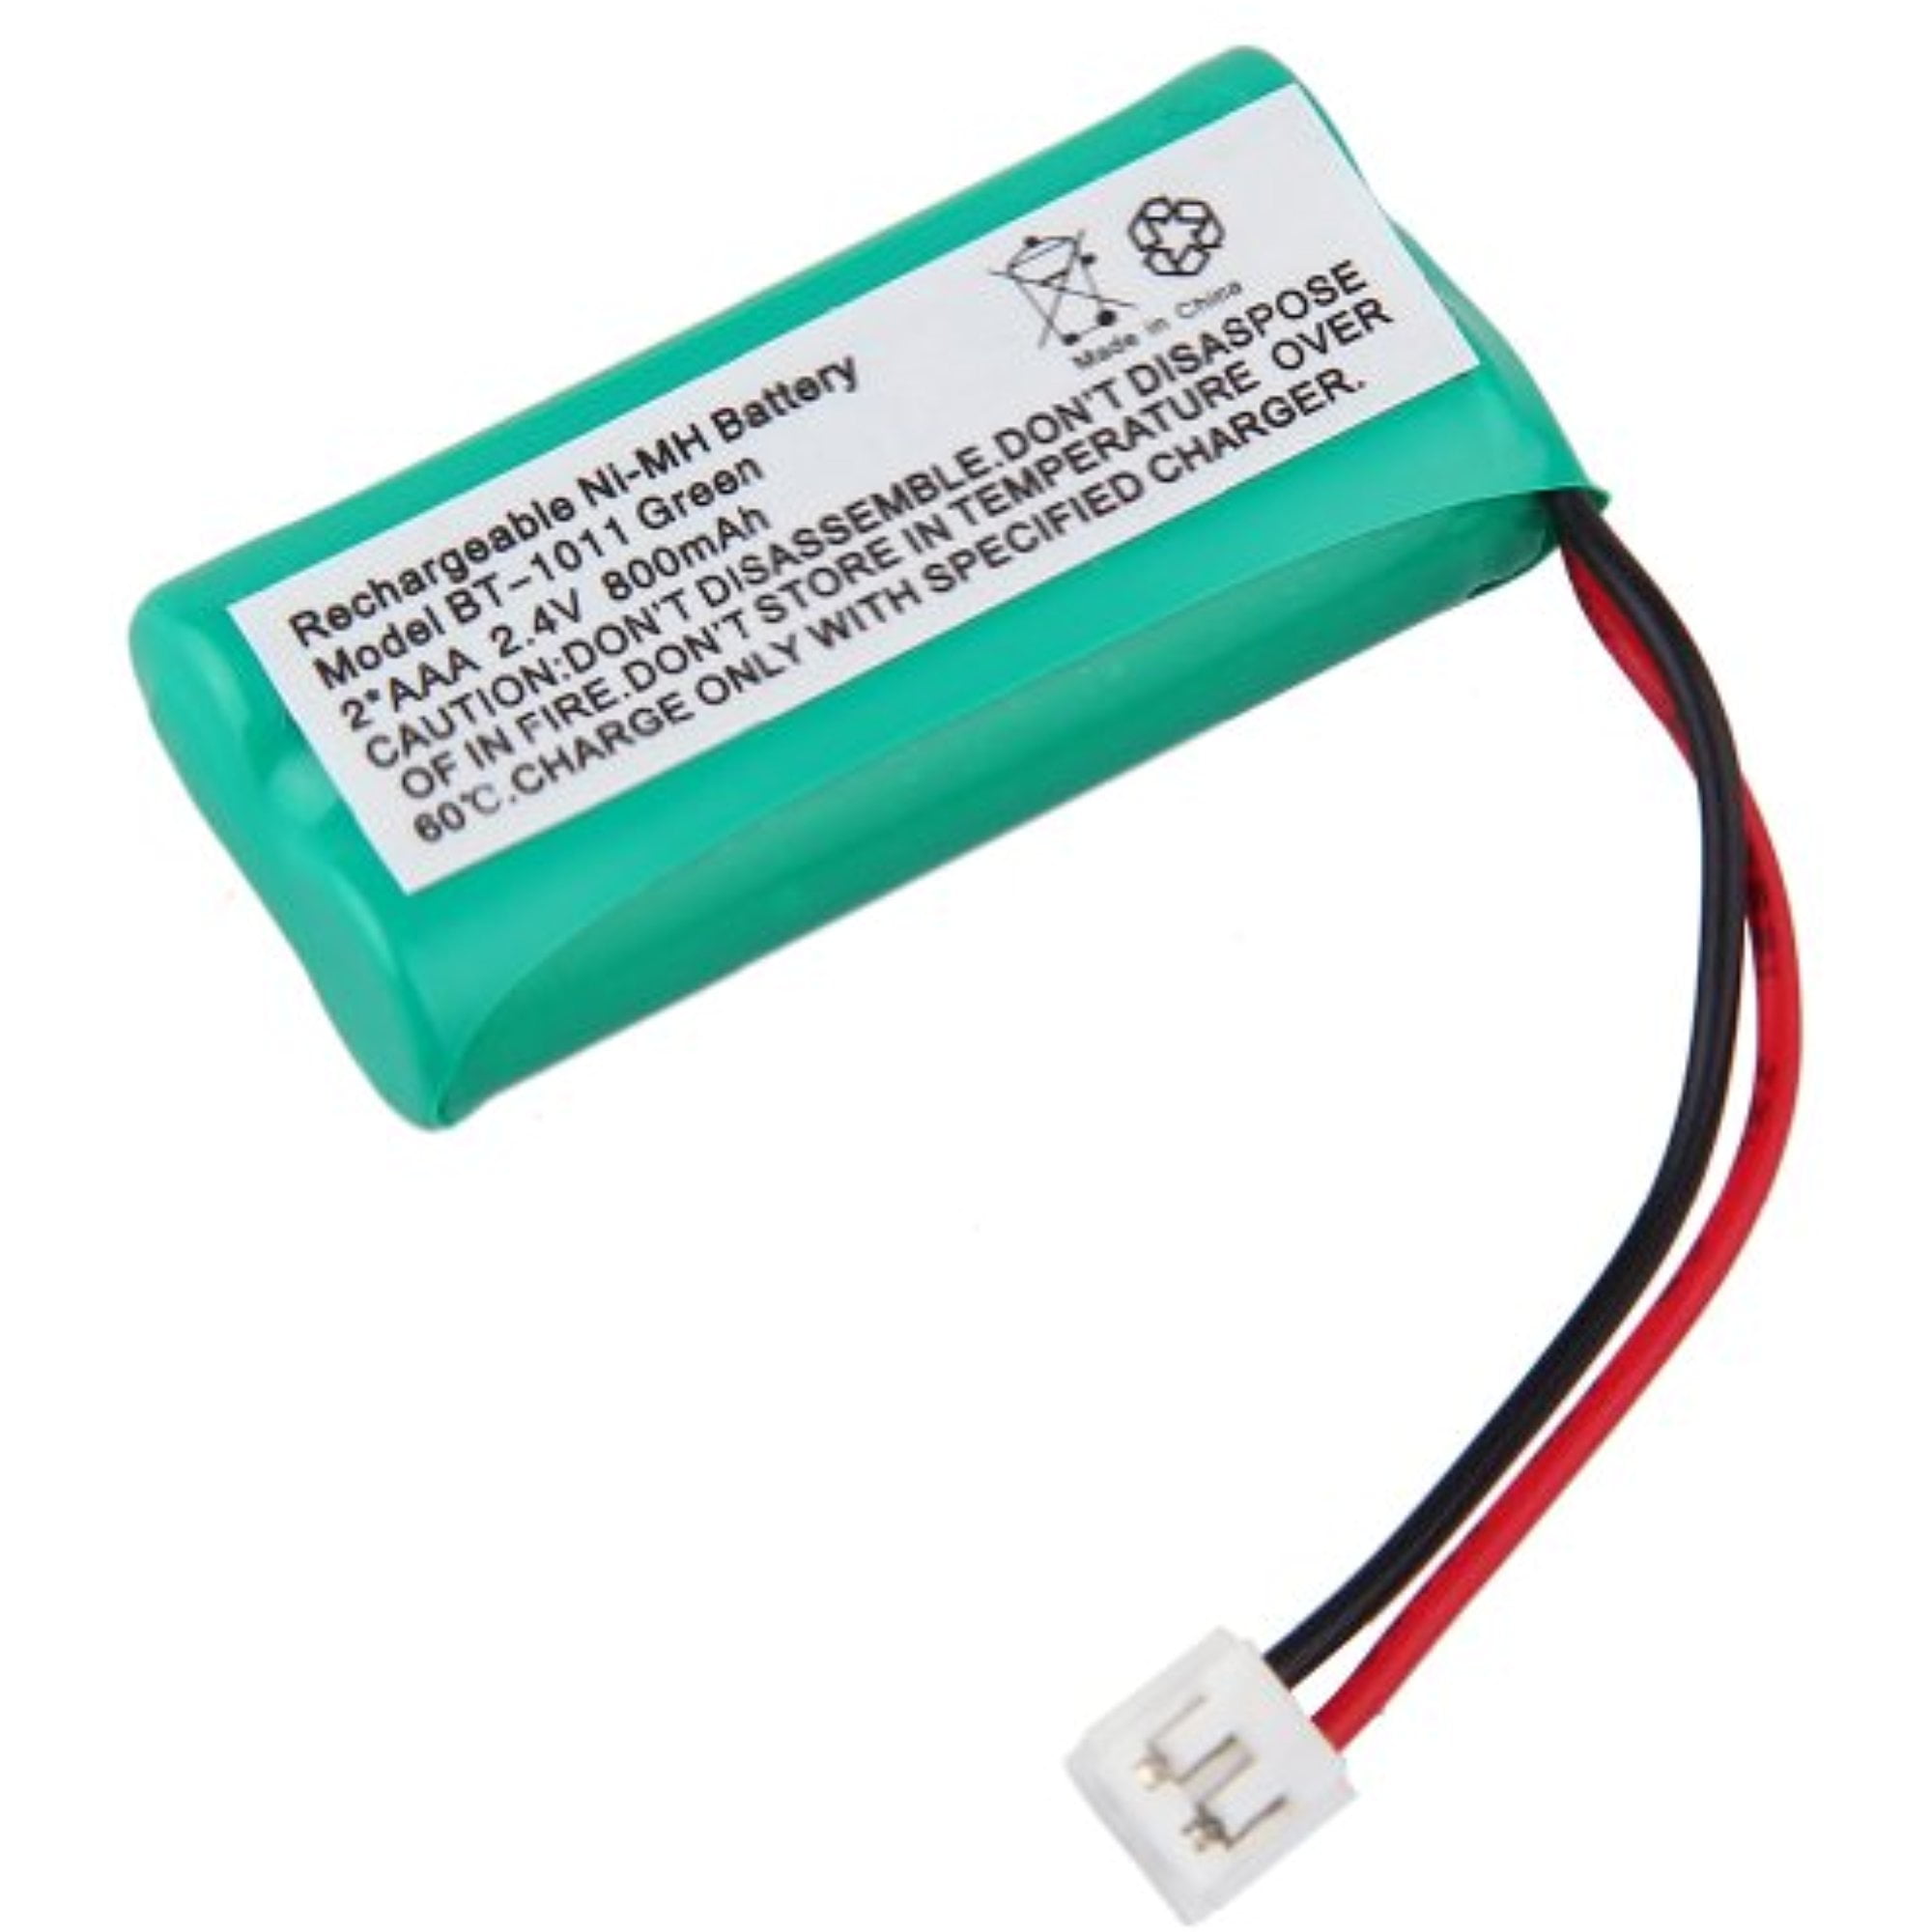 2 Pack Replacement for RCA 25424 Battery Compatible with RCA Cordless Phone Battery 700mAh 2.4V NI-MH